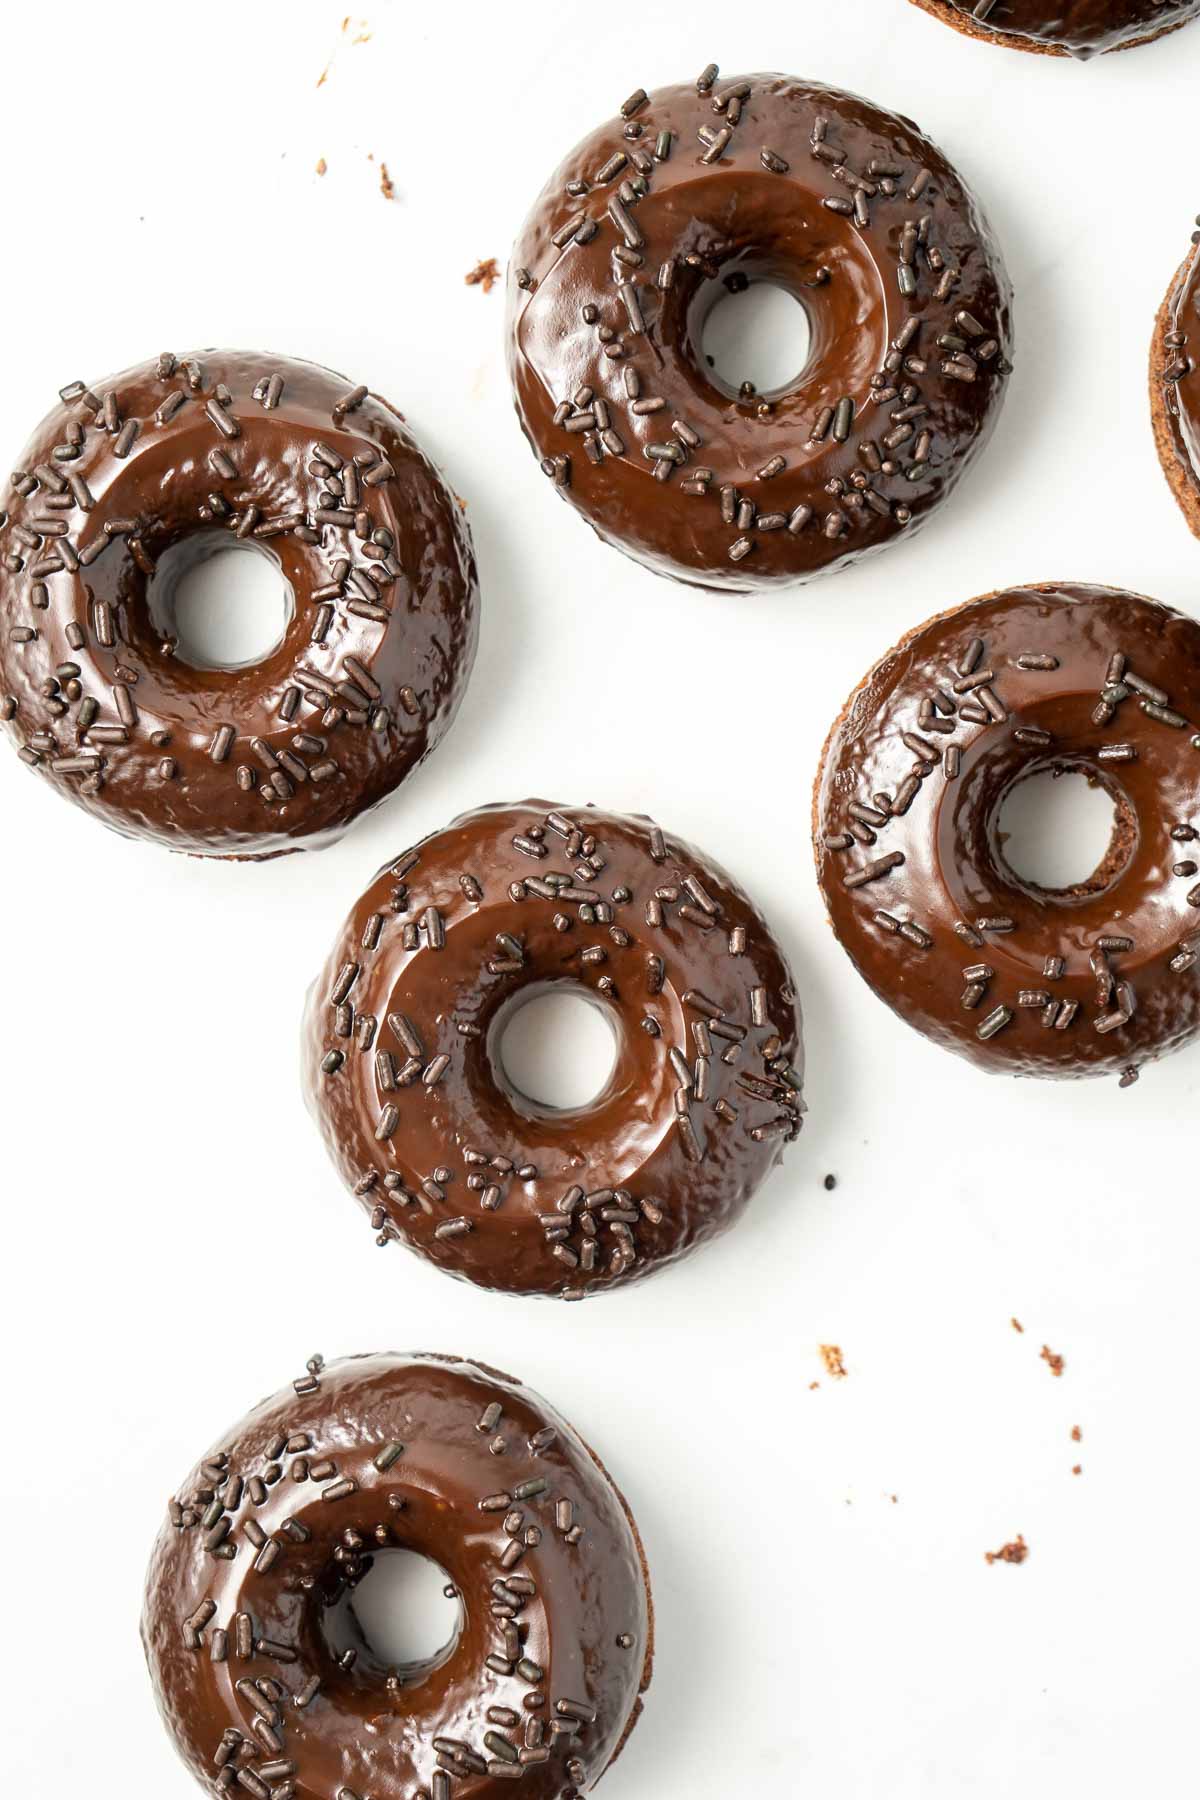 Six chocolate doughnuts with chocolate ganache and sprinkles from above, laid out on a white background.